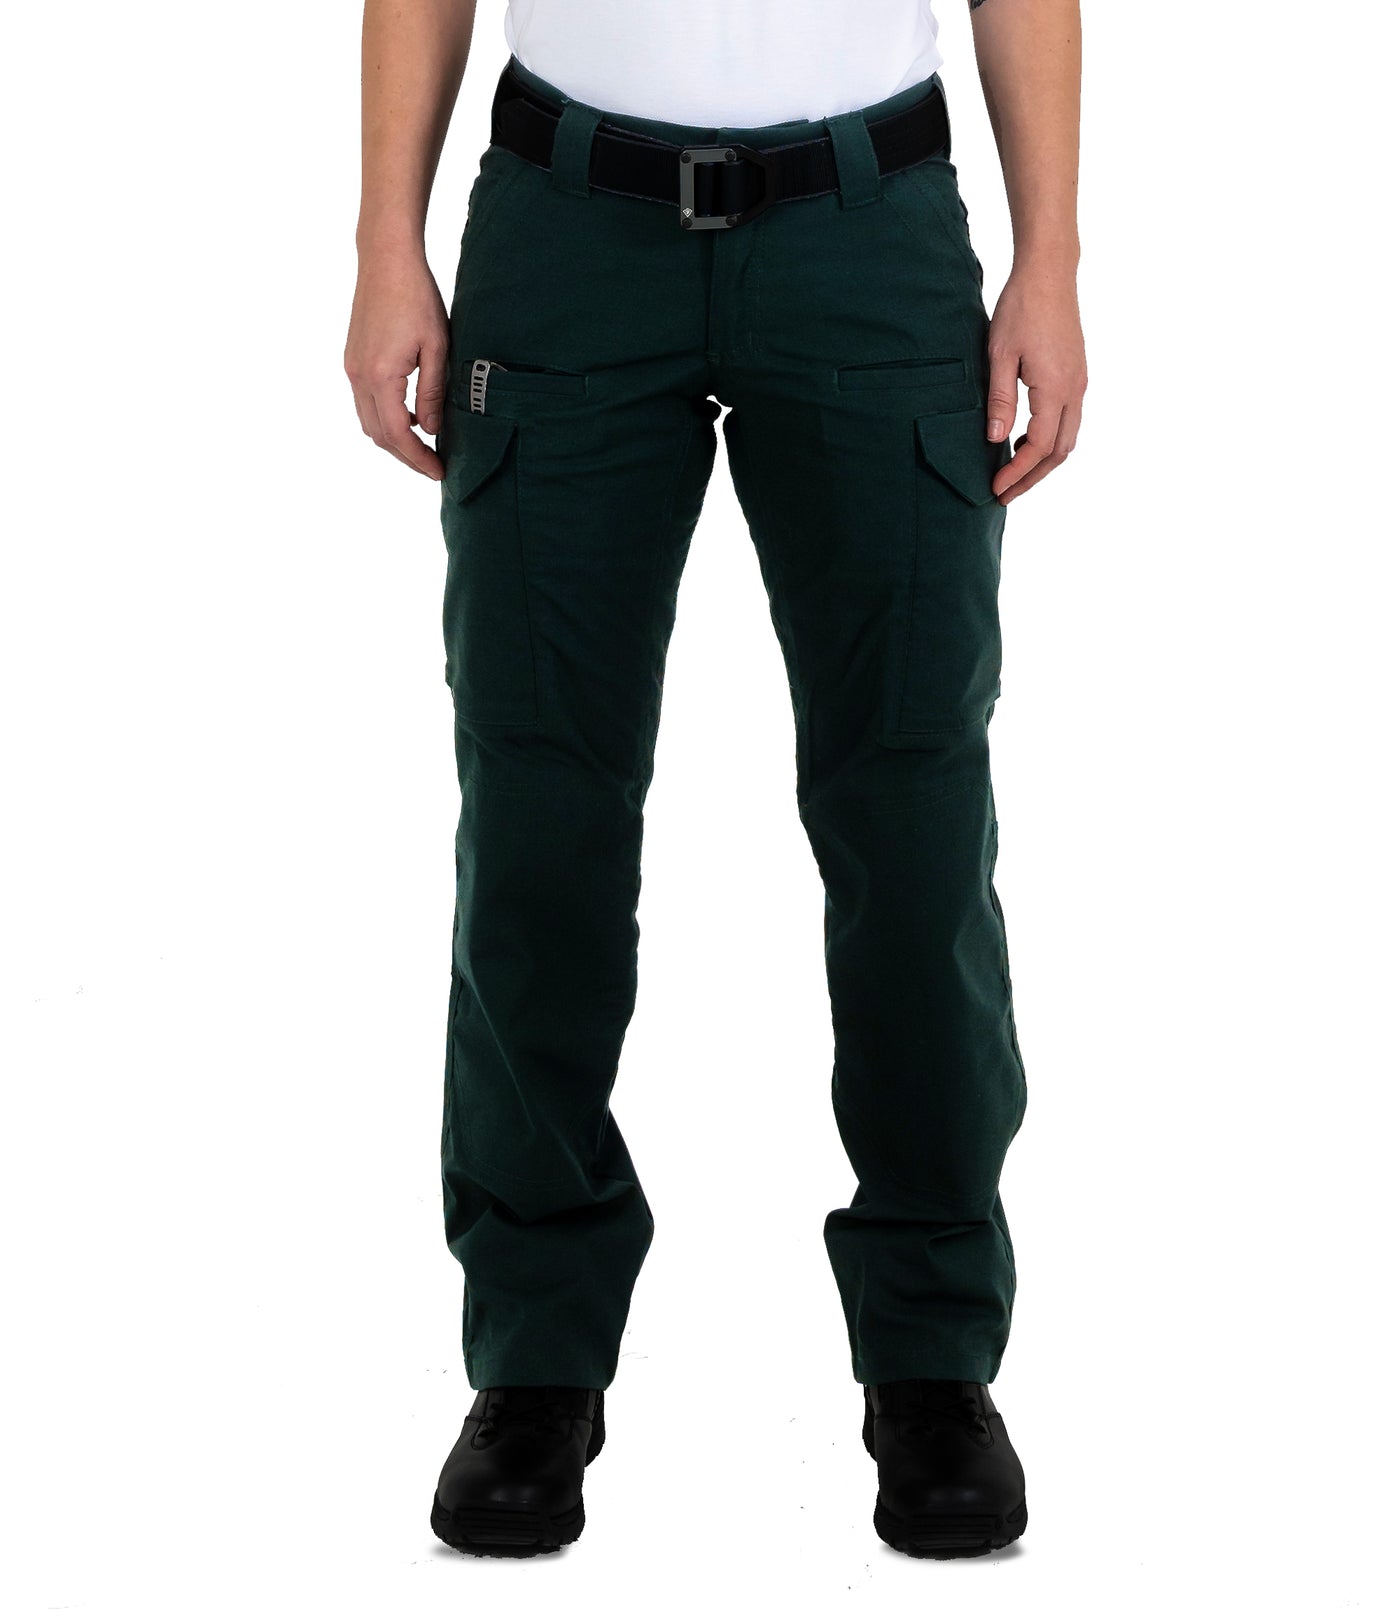 Front of Women's V2 Tactical Pants in Spruce Green